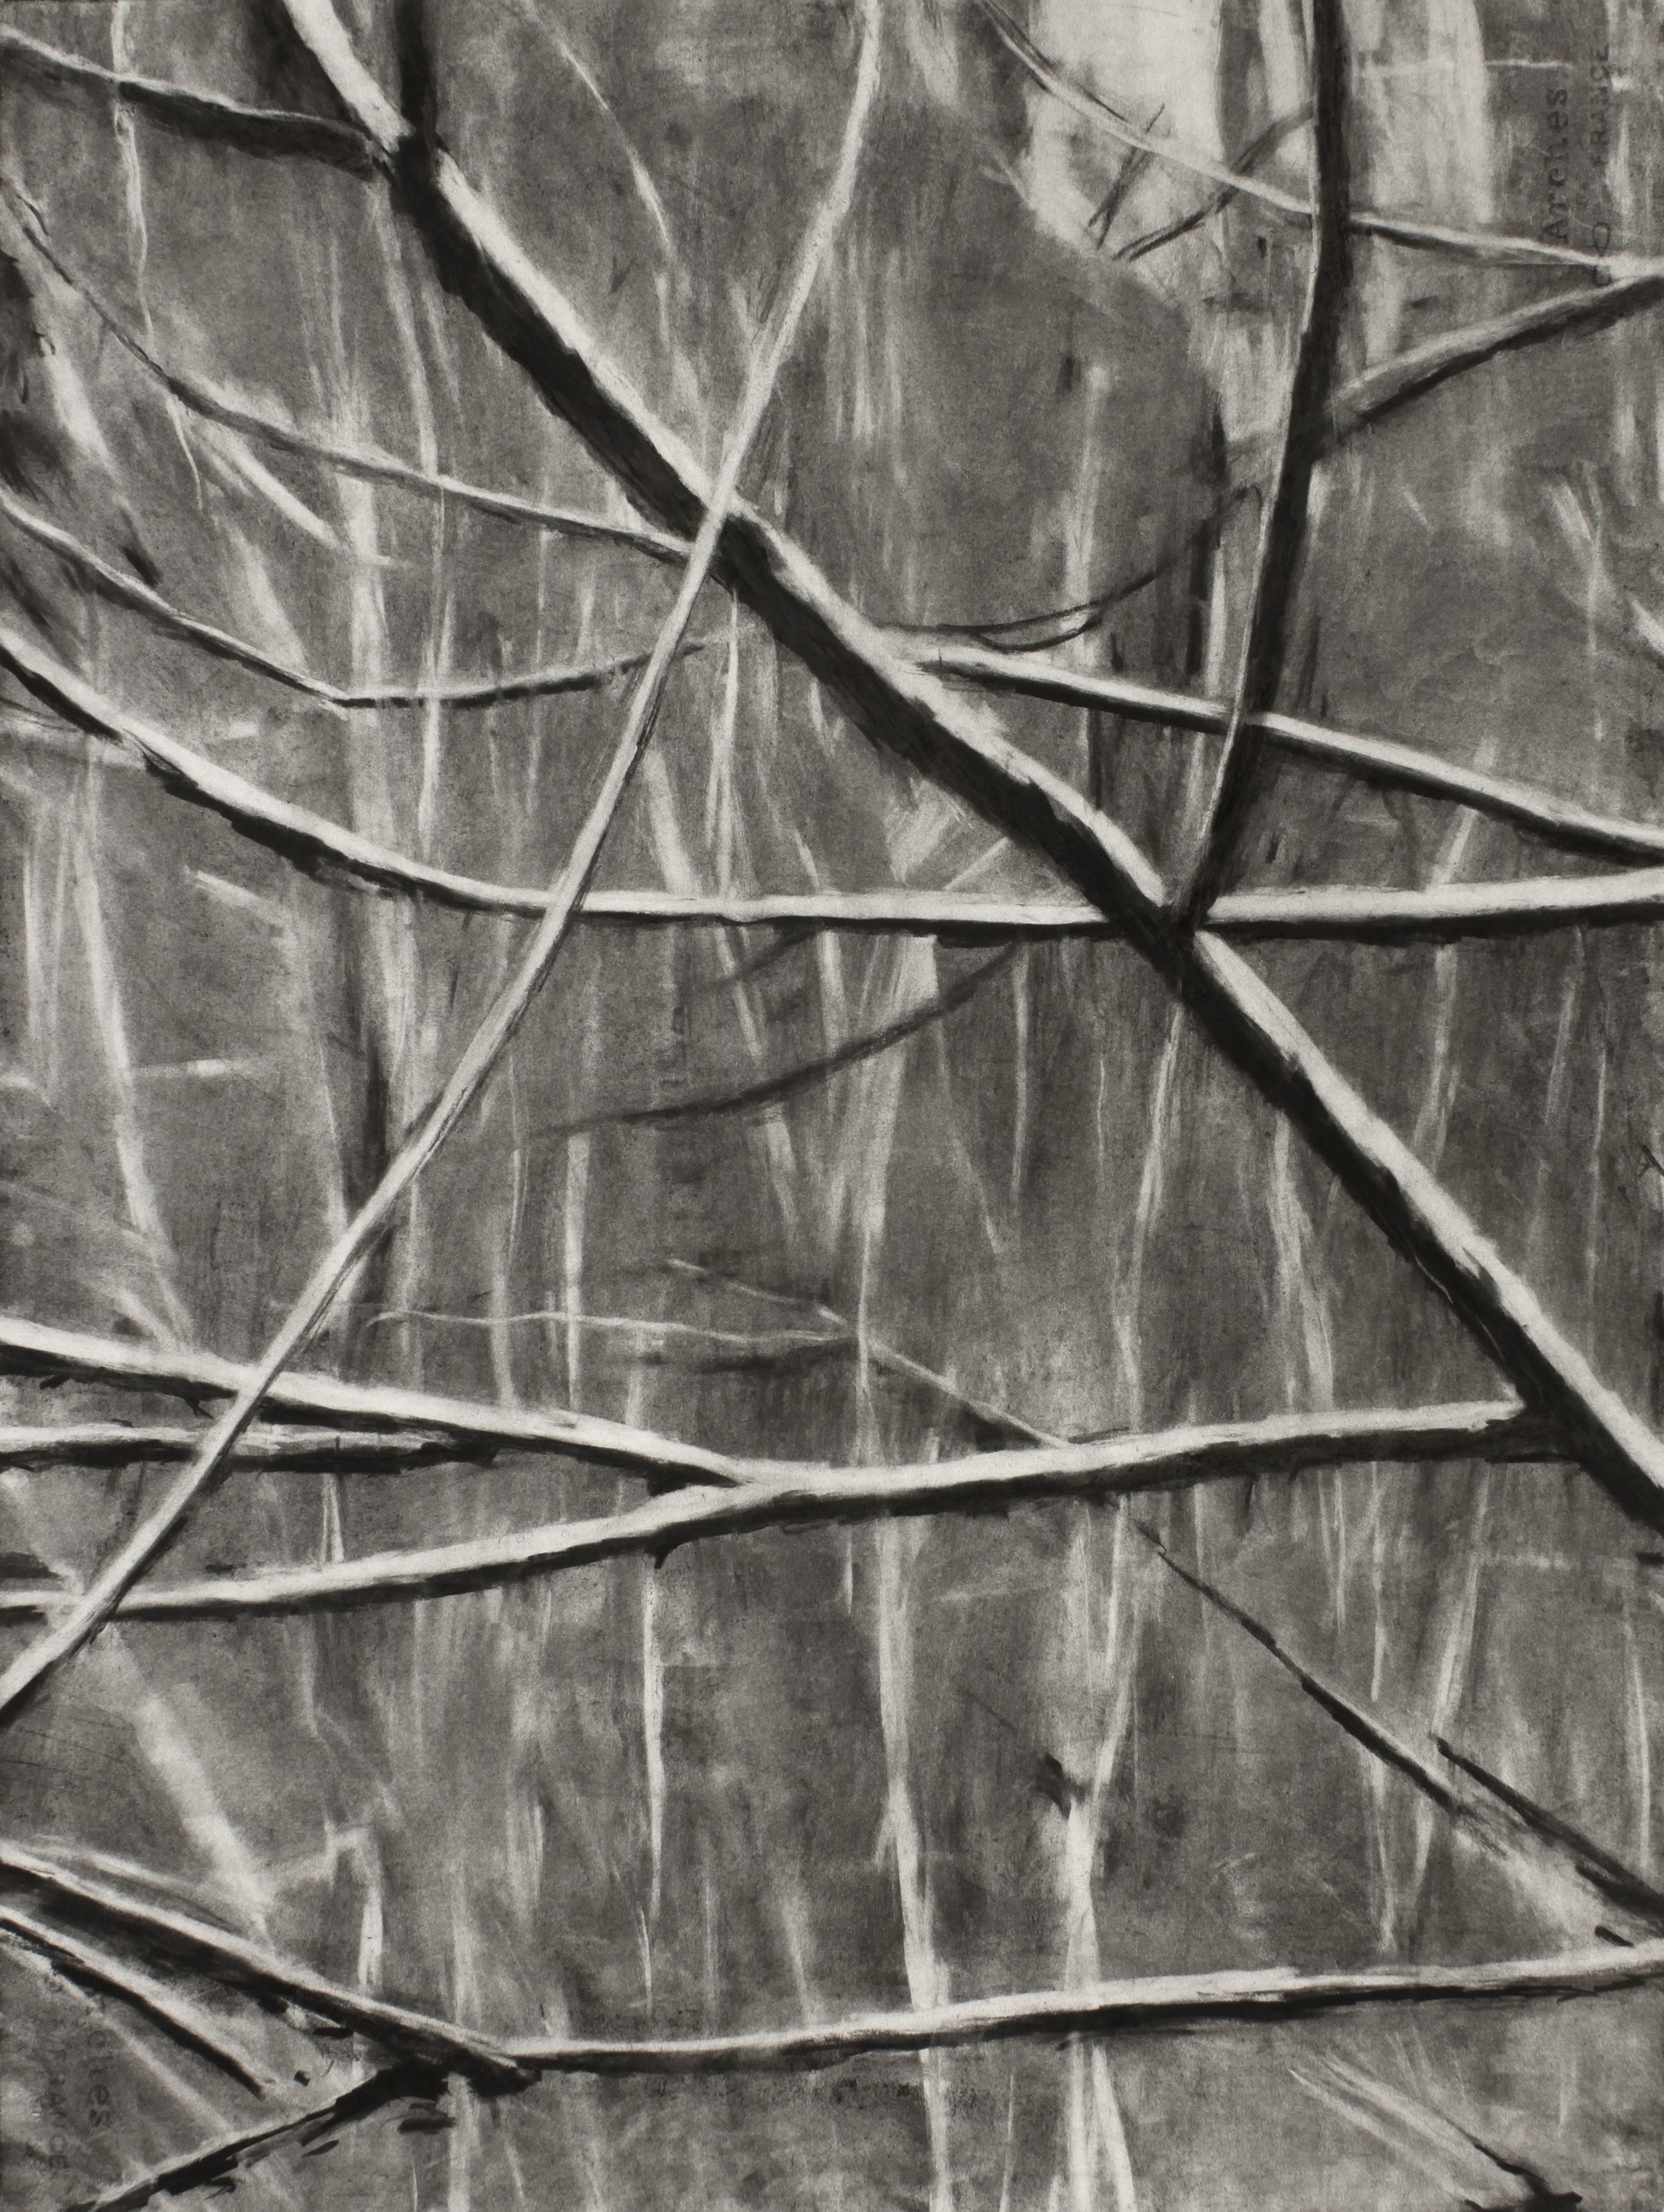   Boundary       2022  Charcoal on Paper      30” x  22”   